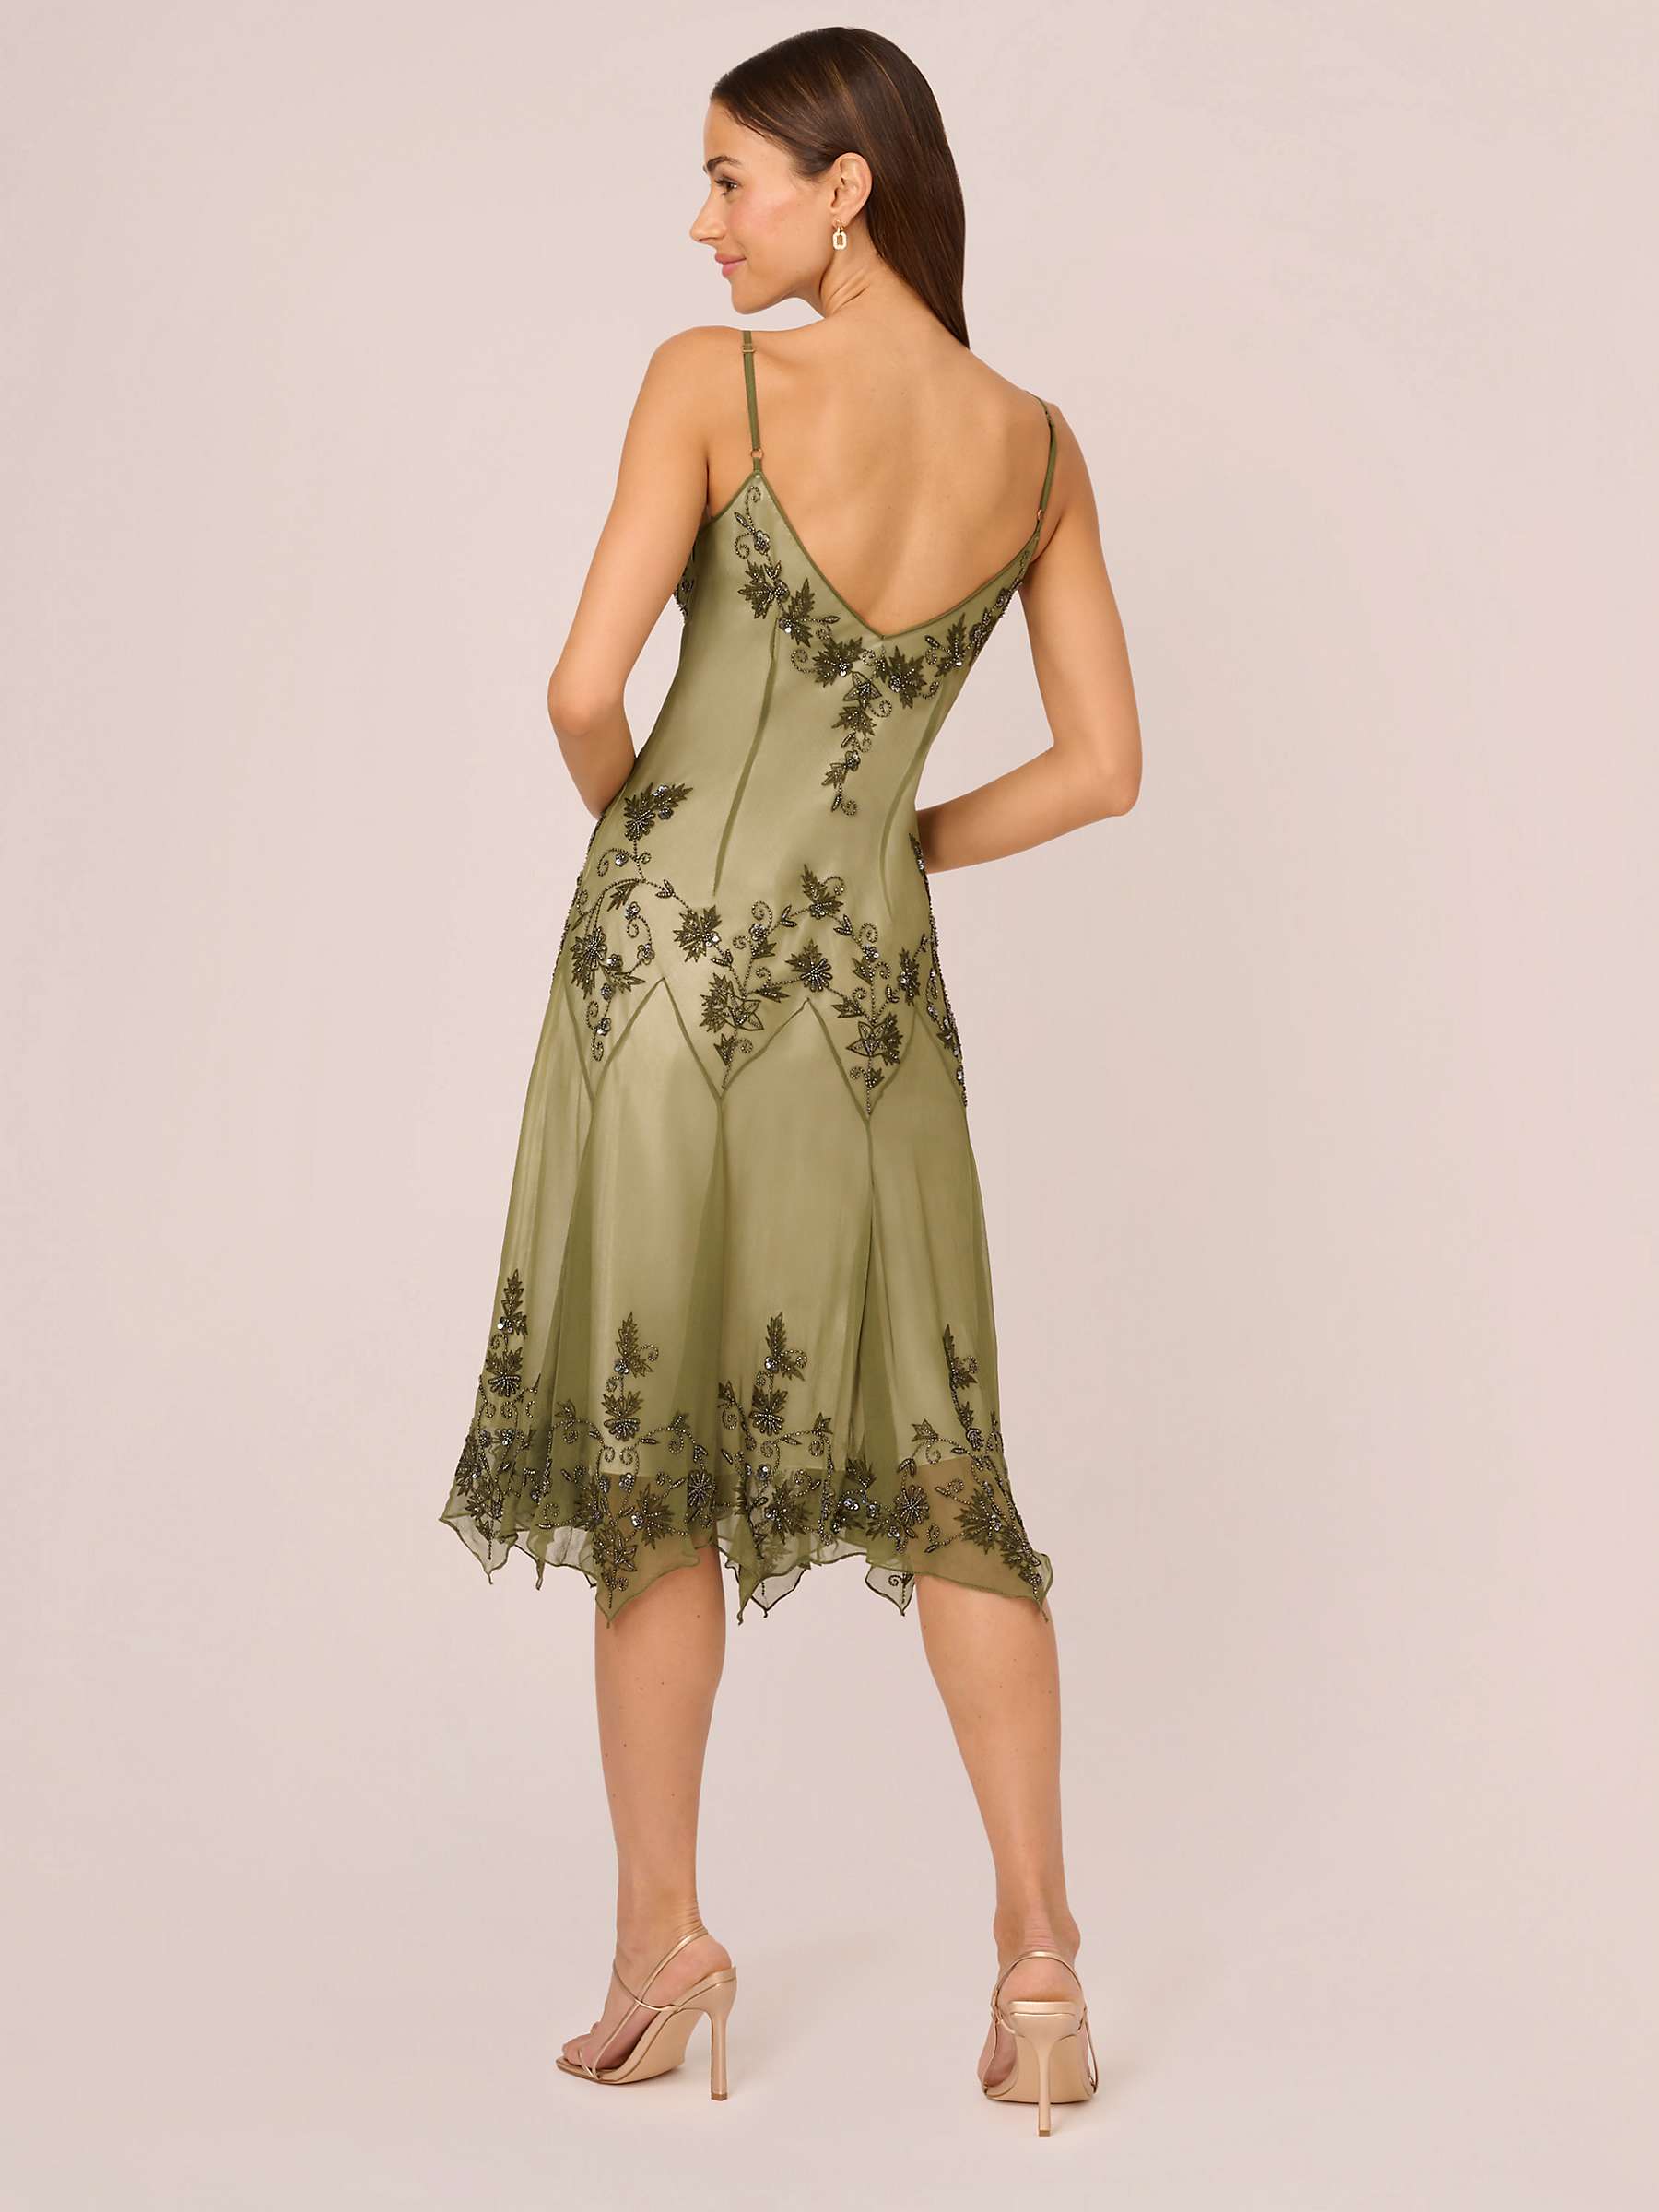 Buy Adrianna by Adrianna Papell Beaded Satin Georgette Dress, Olive Online at johnlewis.com